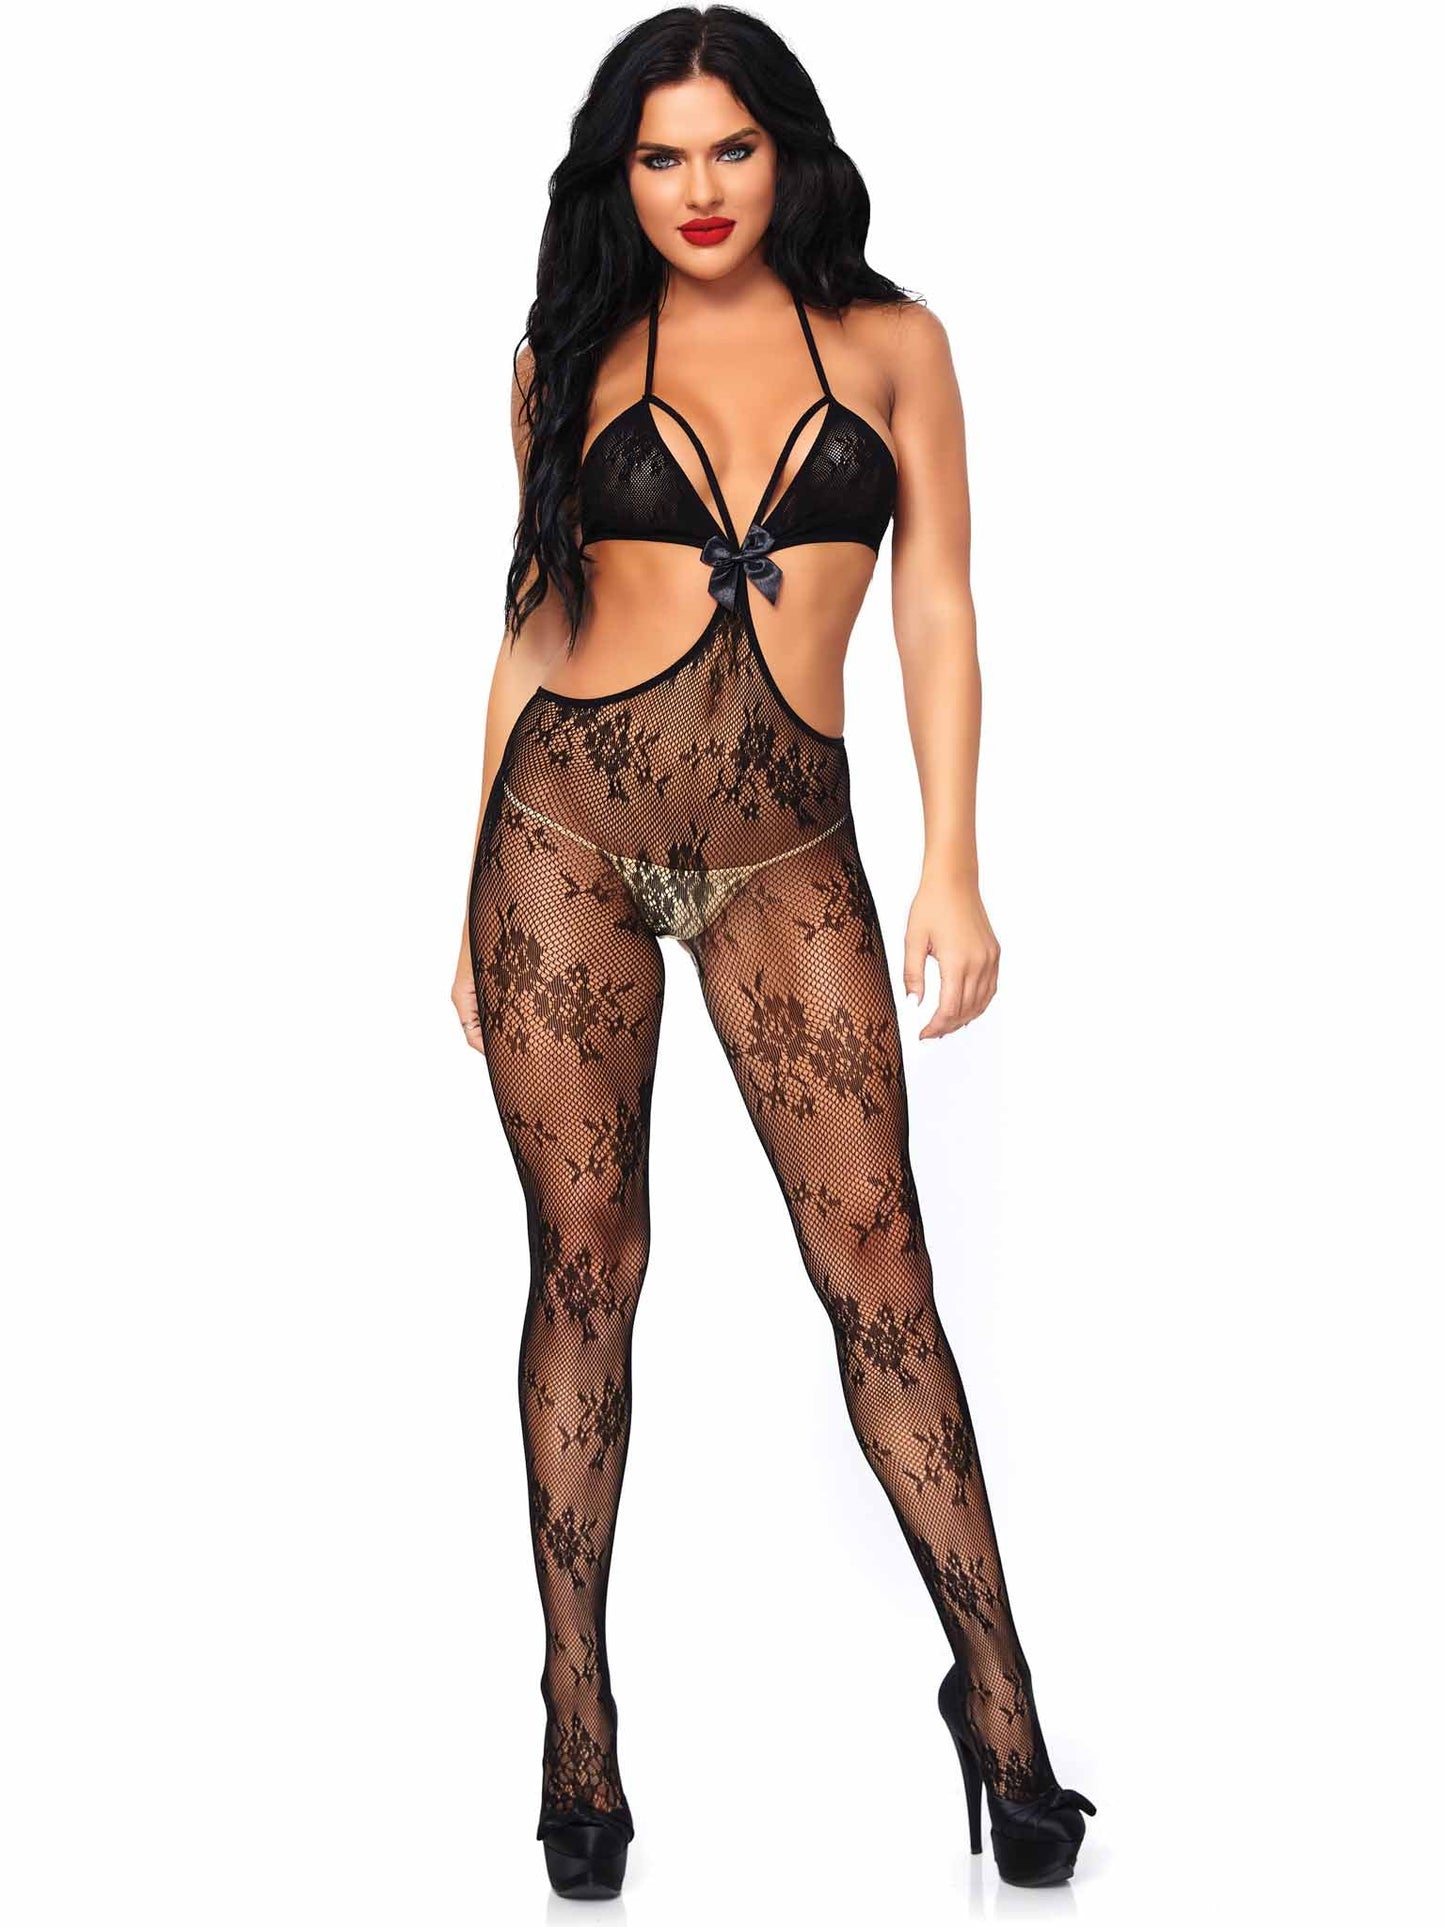 Lust & Lace Bodystocking